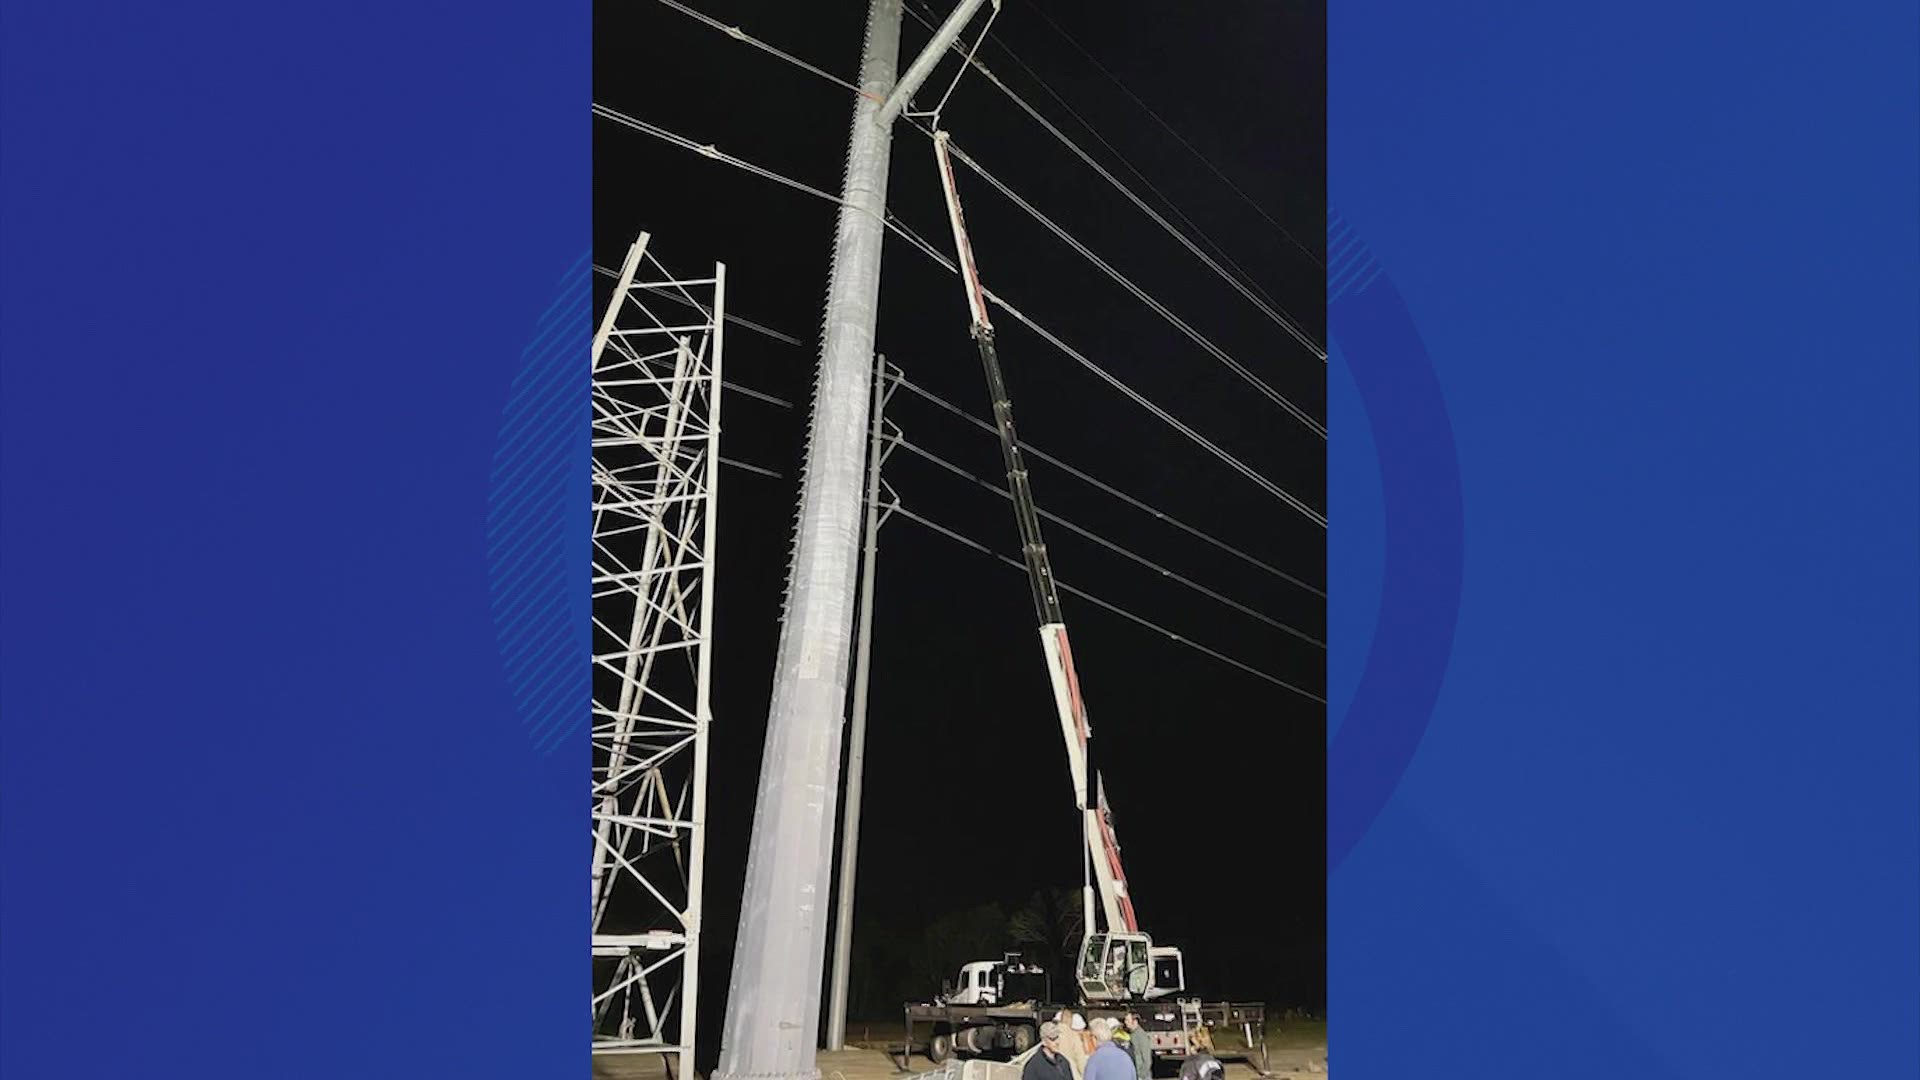 The Chambers County Sheriff's Office said the victims were working on a high-voltage transmission line early Sunday near FM 1942 and Hatcherville.